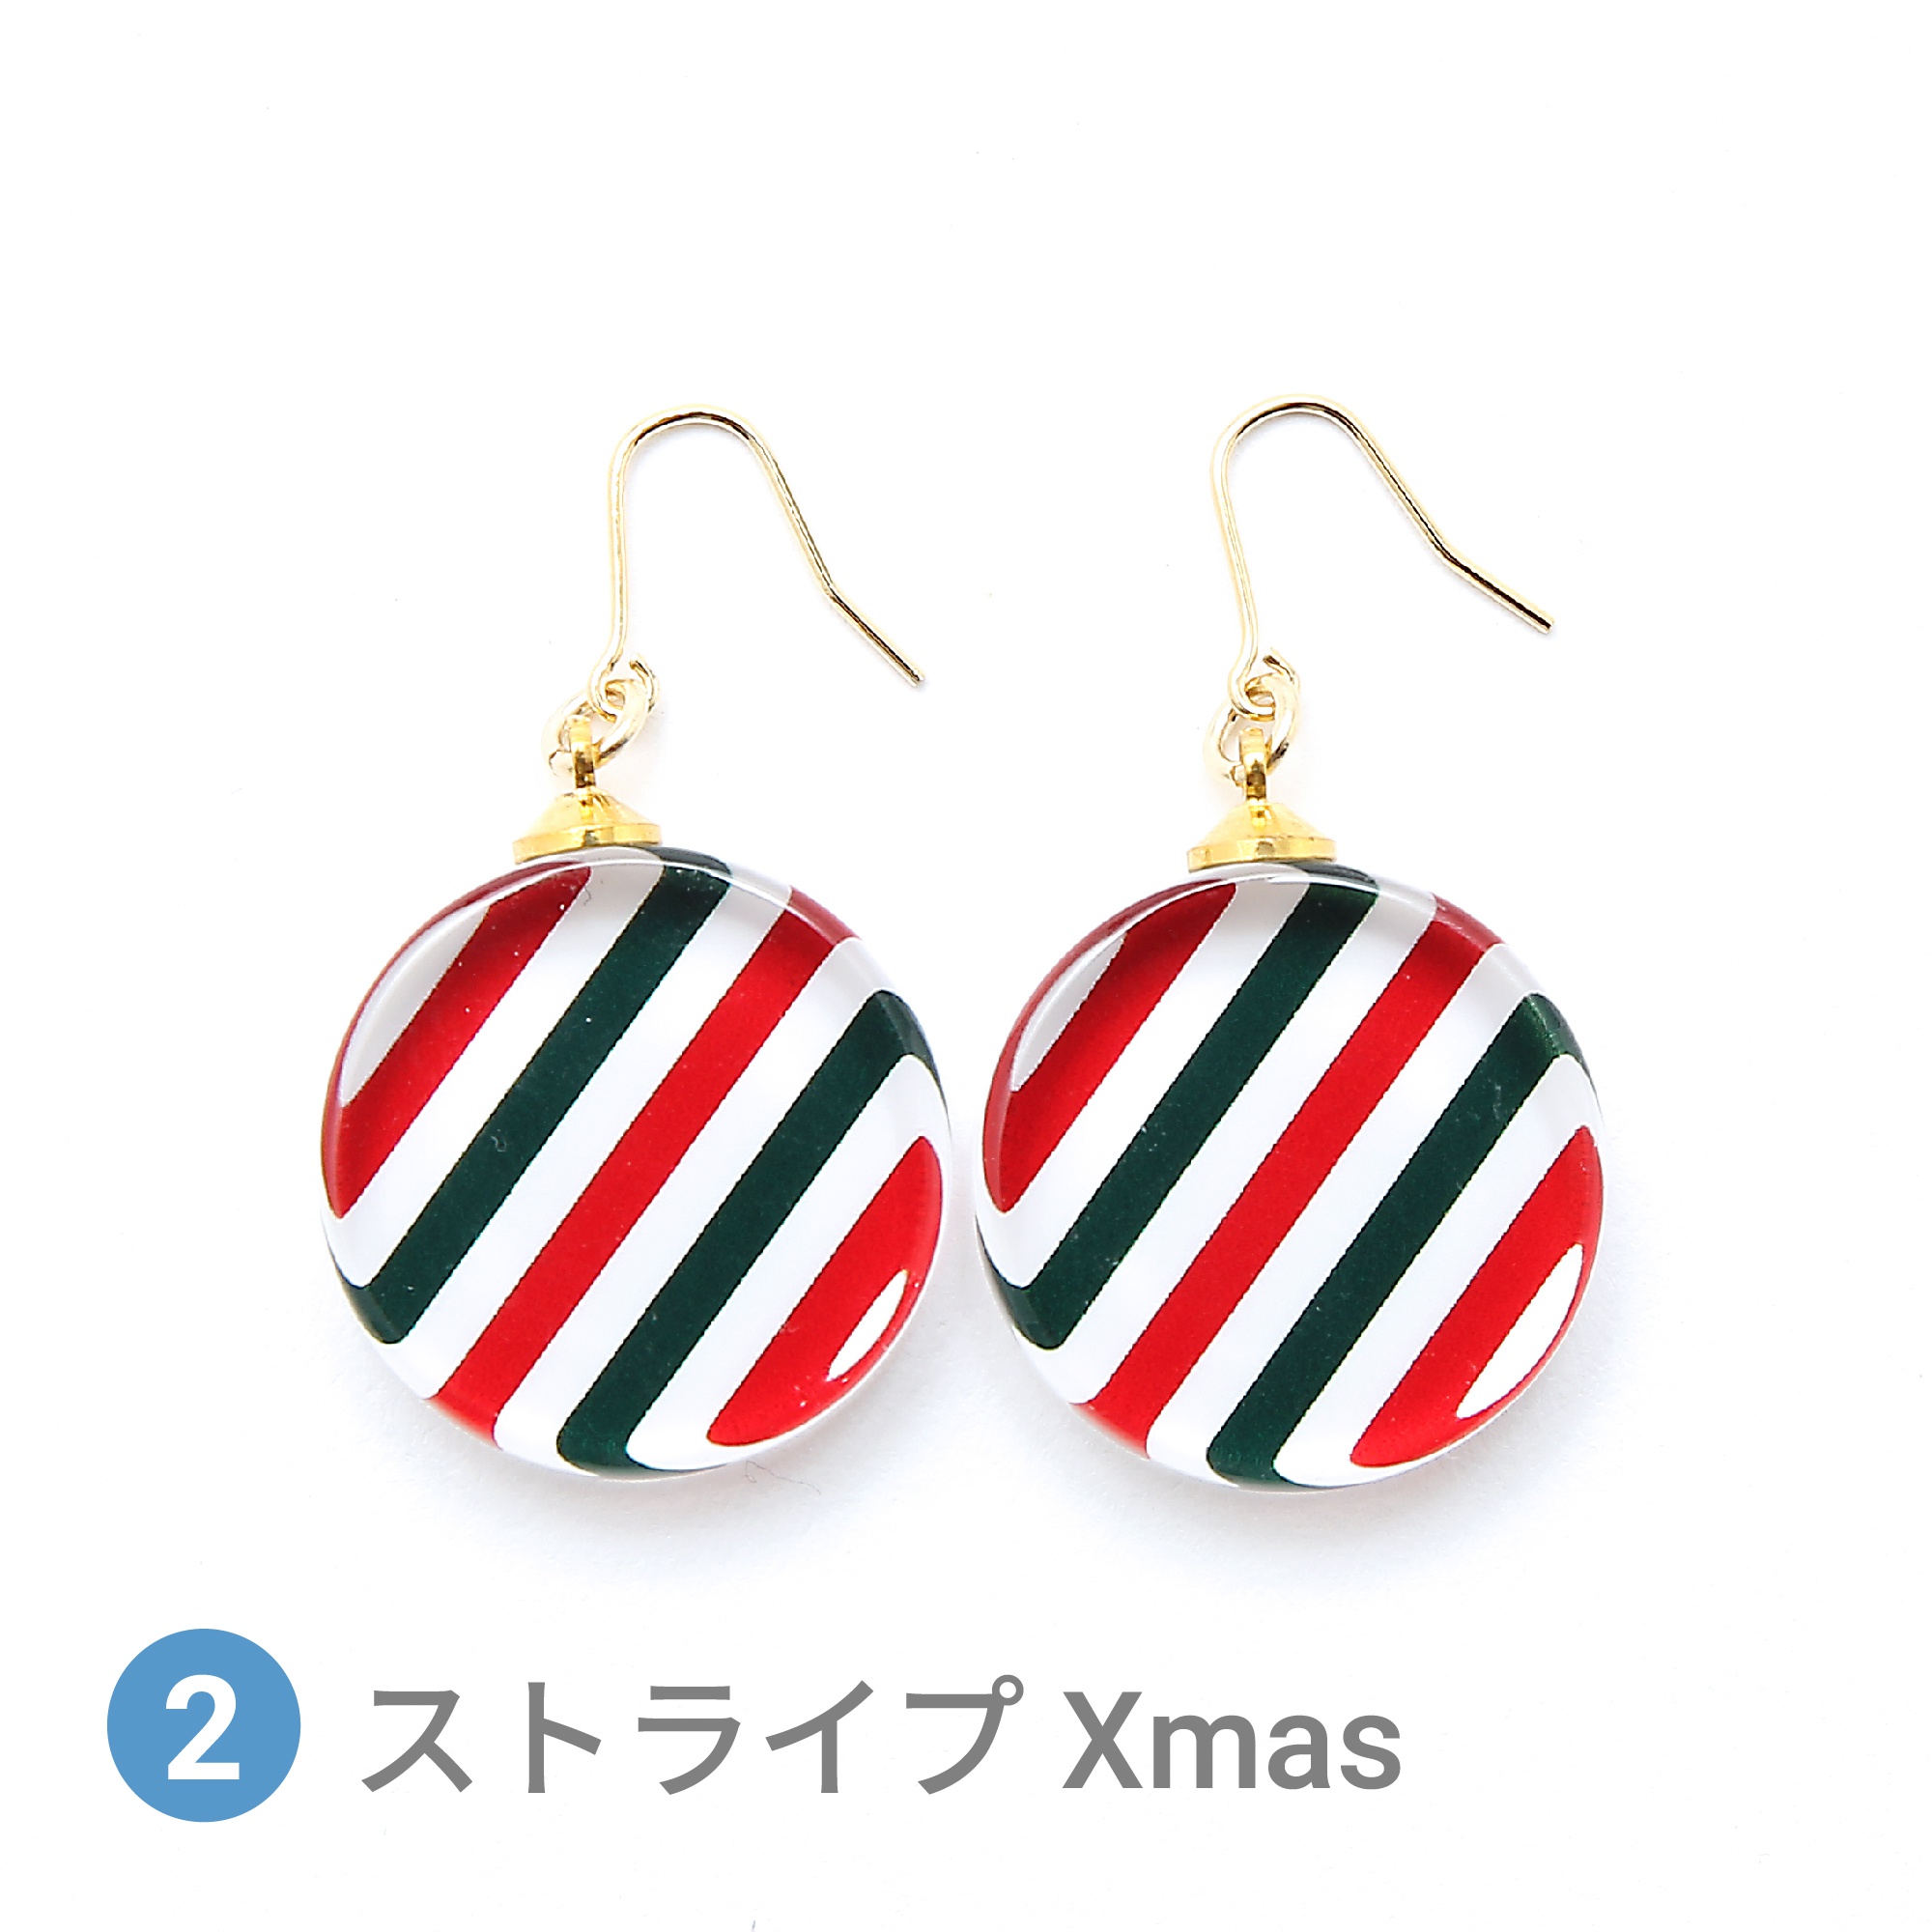 Glass accessories Pierced Earring Xmas color stripe round shape